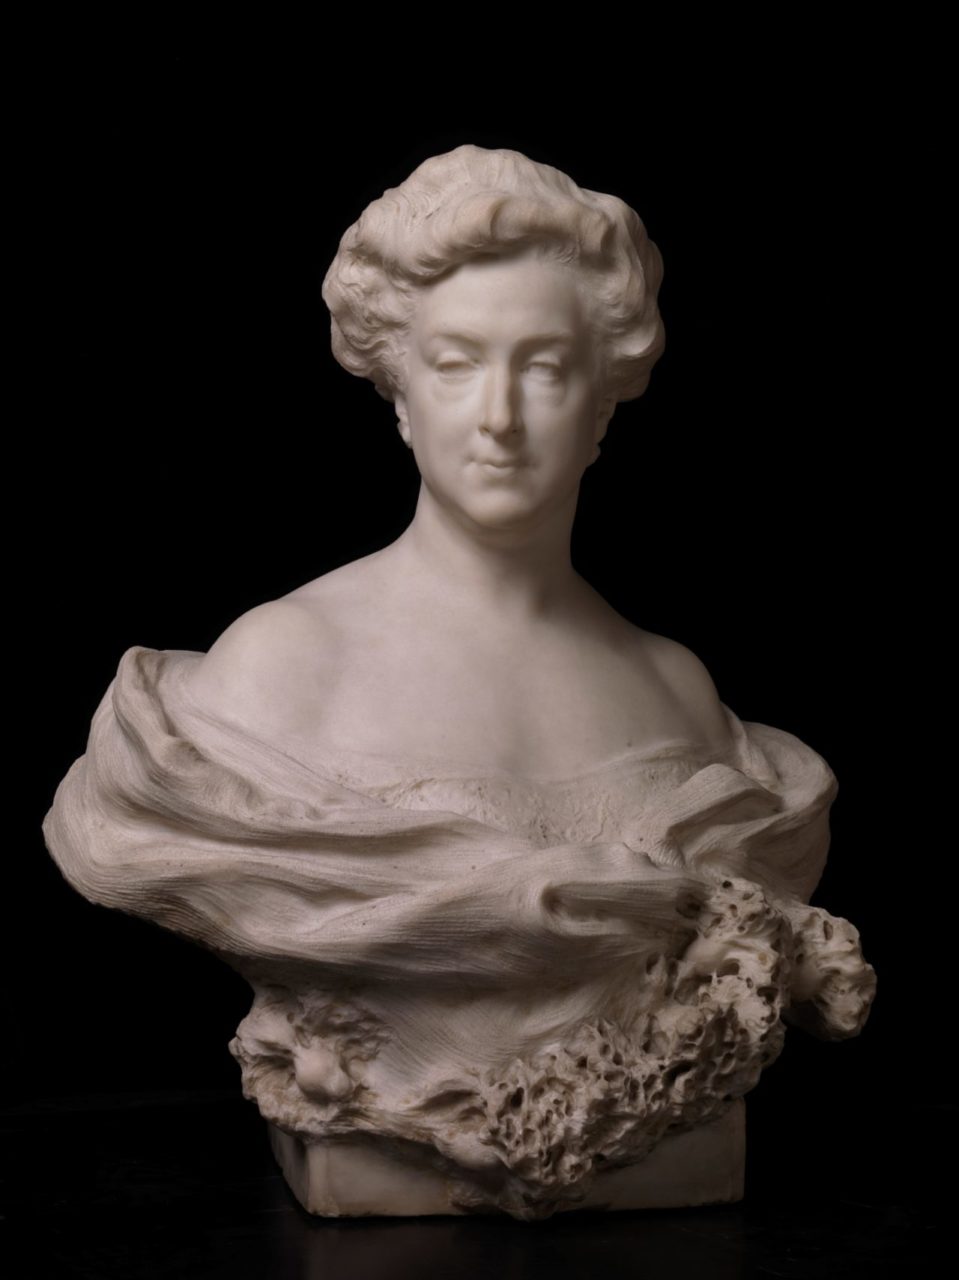 Faustina Peñalver y Fauste, dowager Marchioness of Amboage